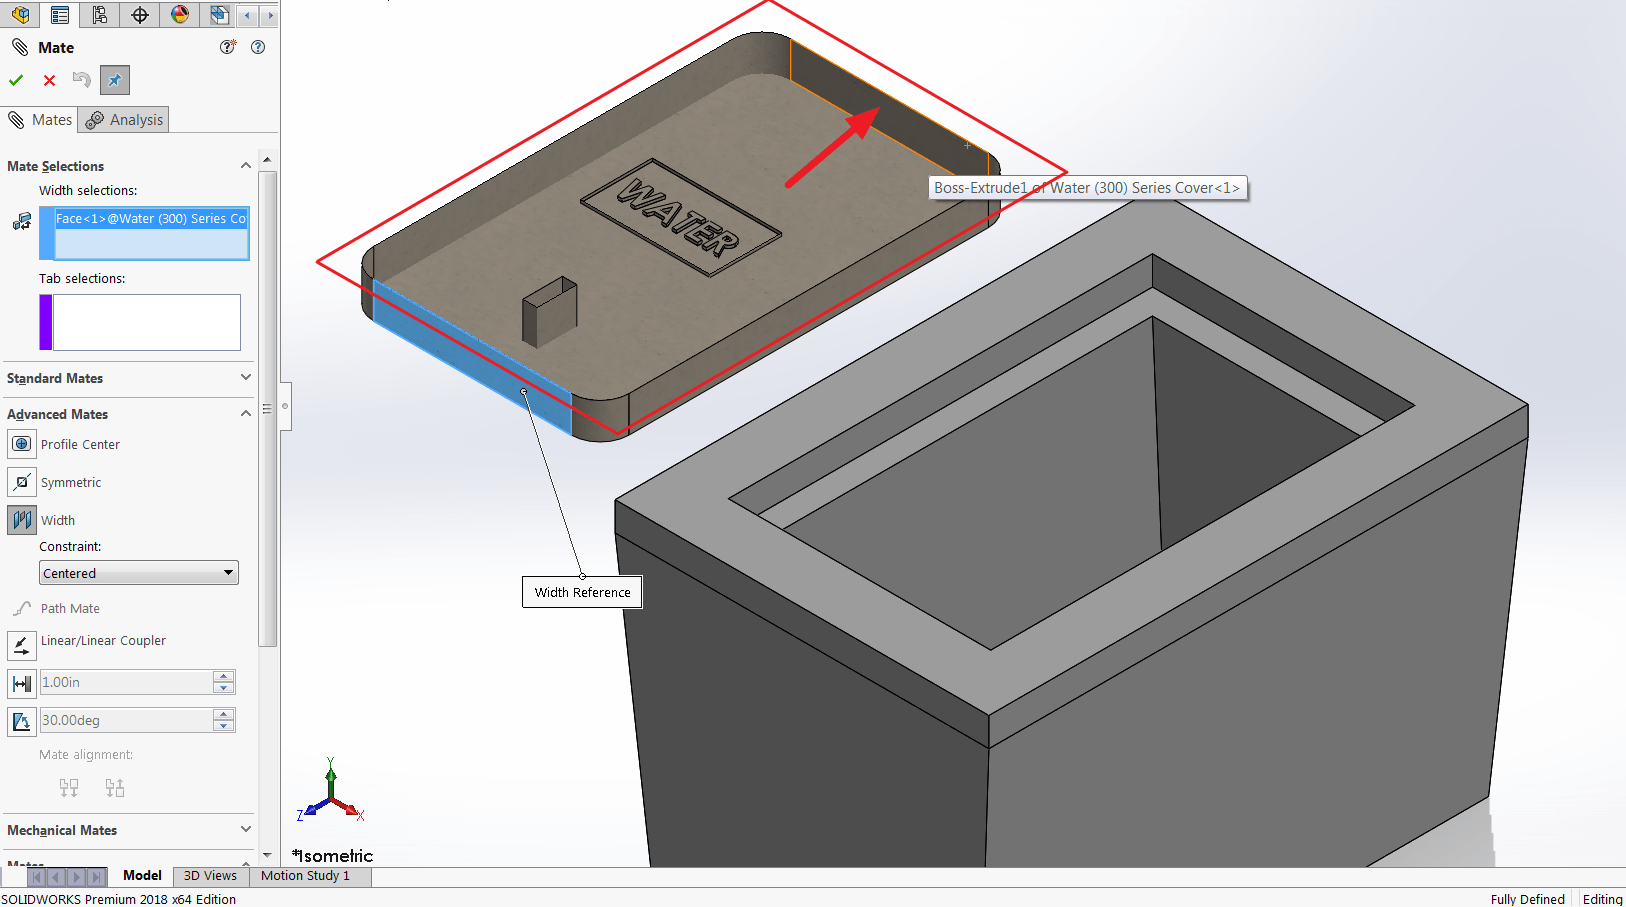 New SOLIDWORKS 2018: Temporarily Hiding Faces When Selecting Mates